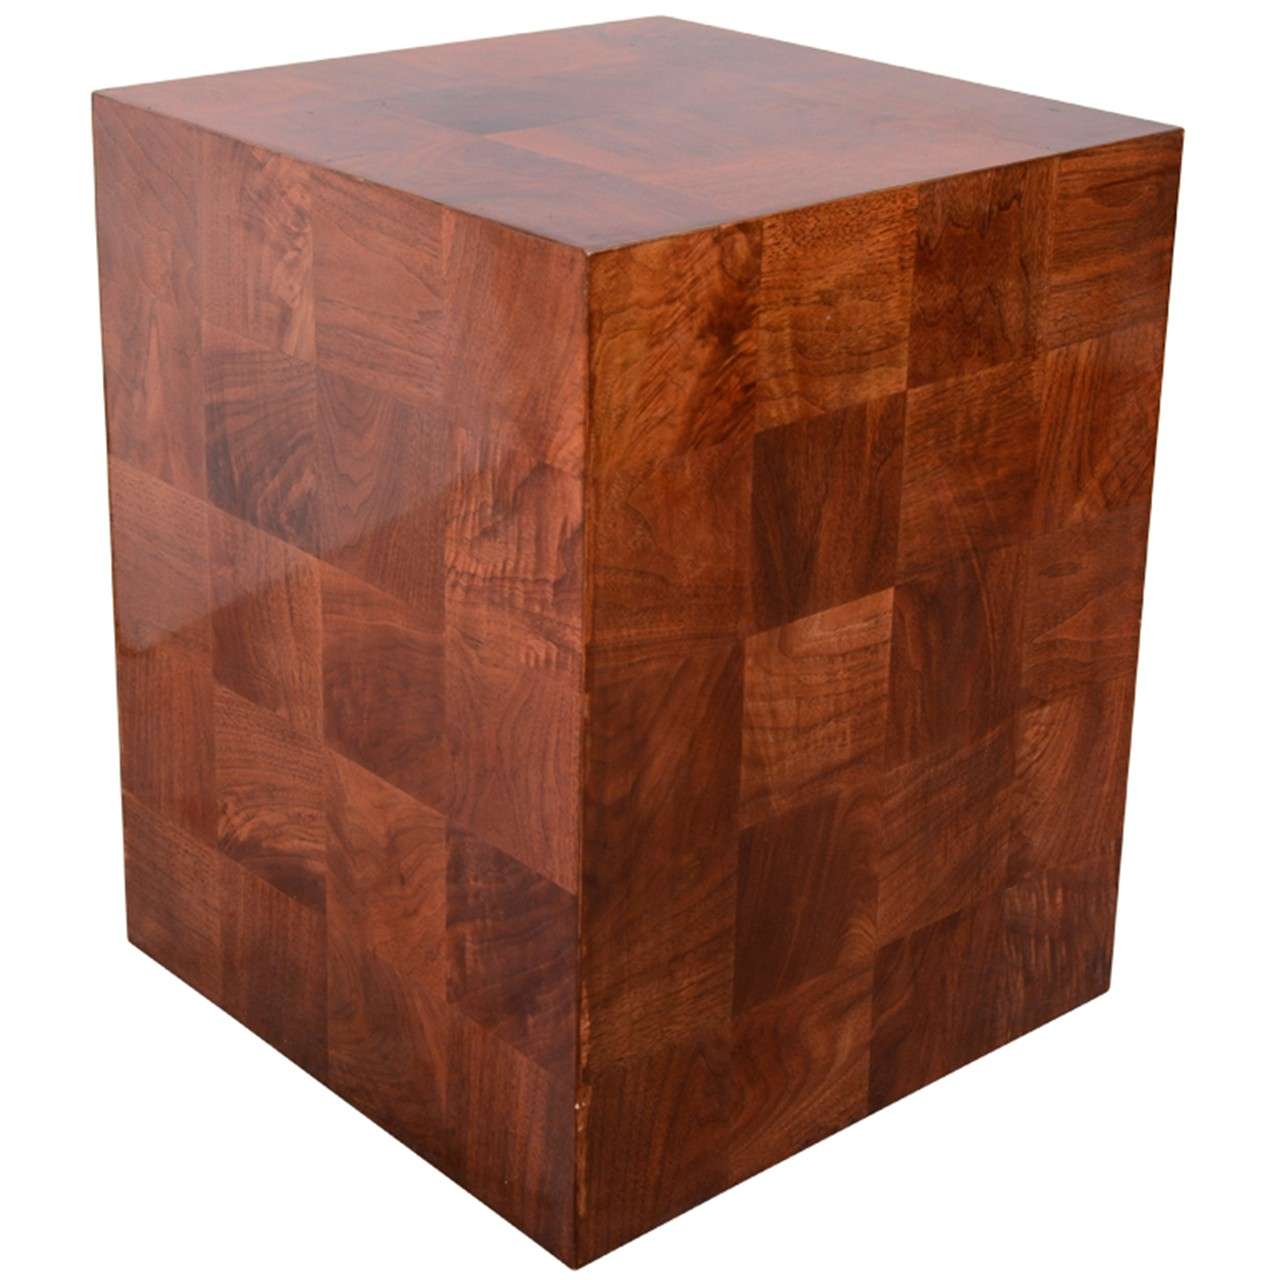 Vintage Lacquered Wood Cube Form Side Table